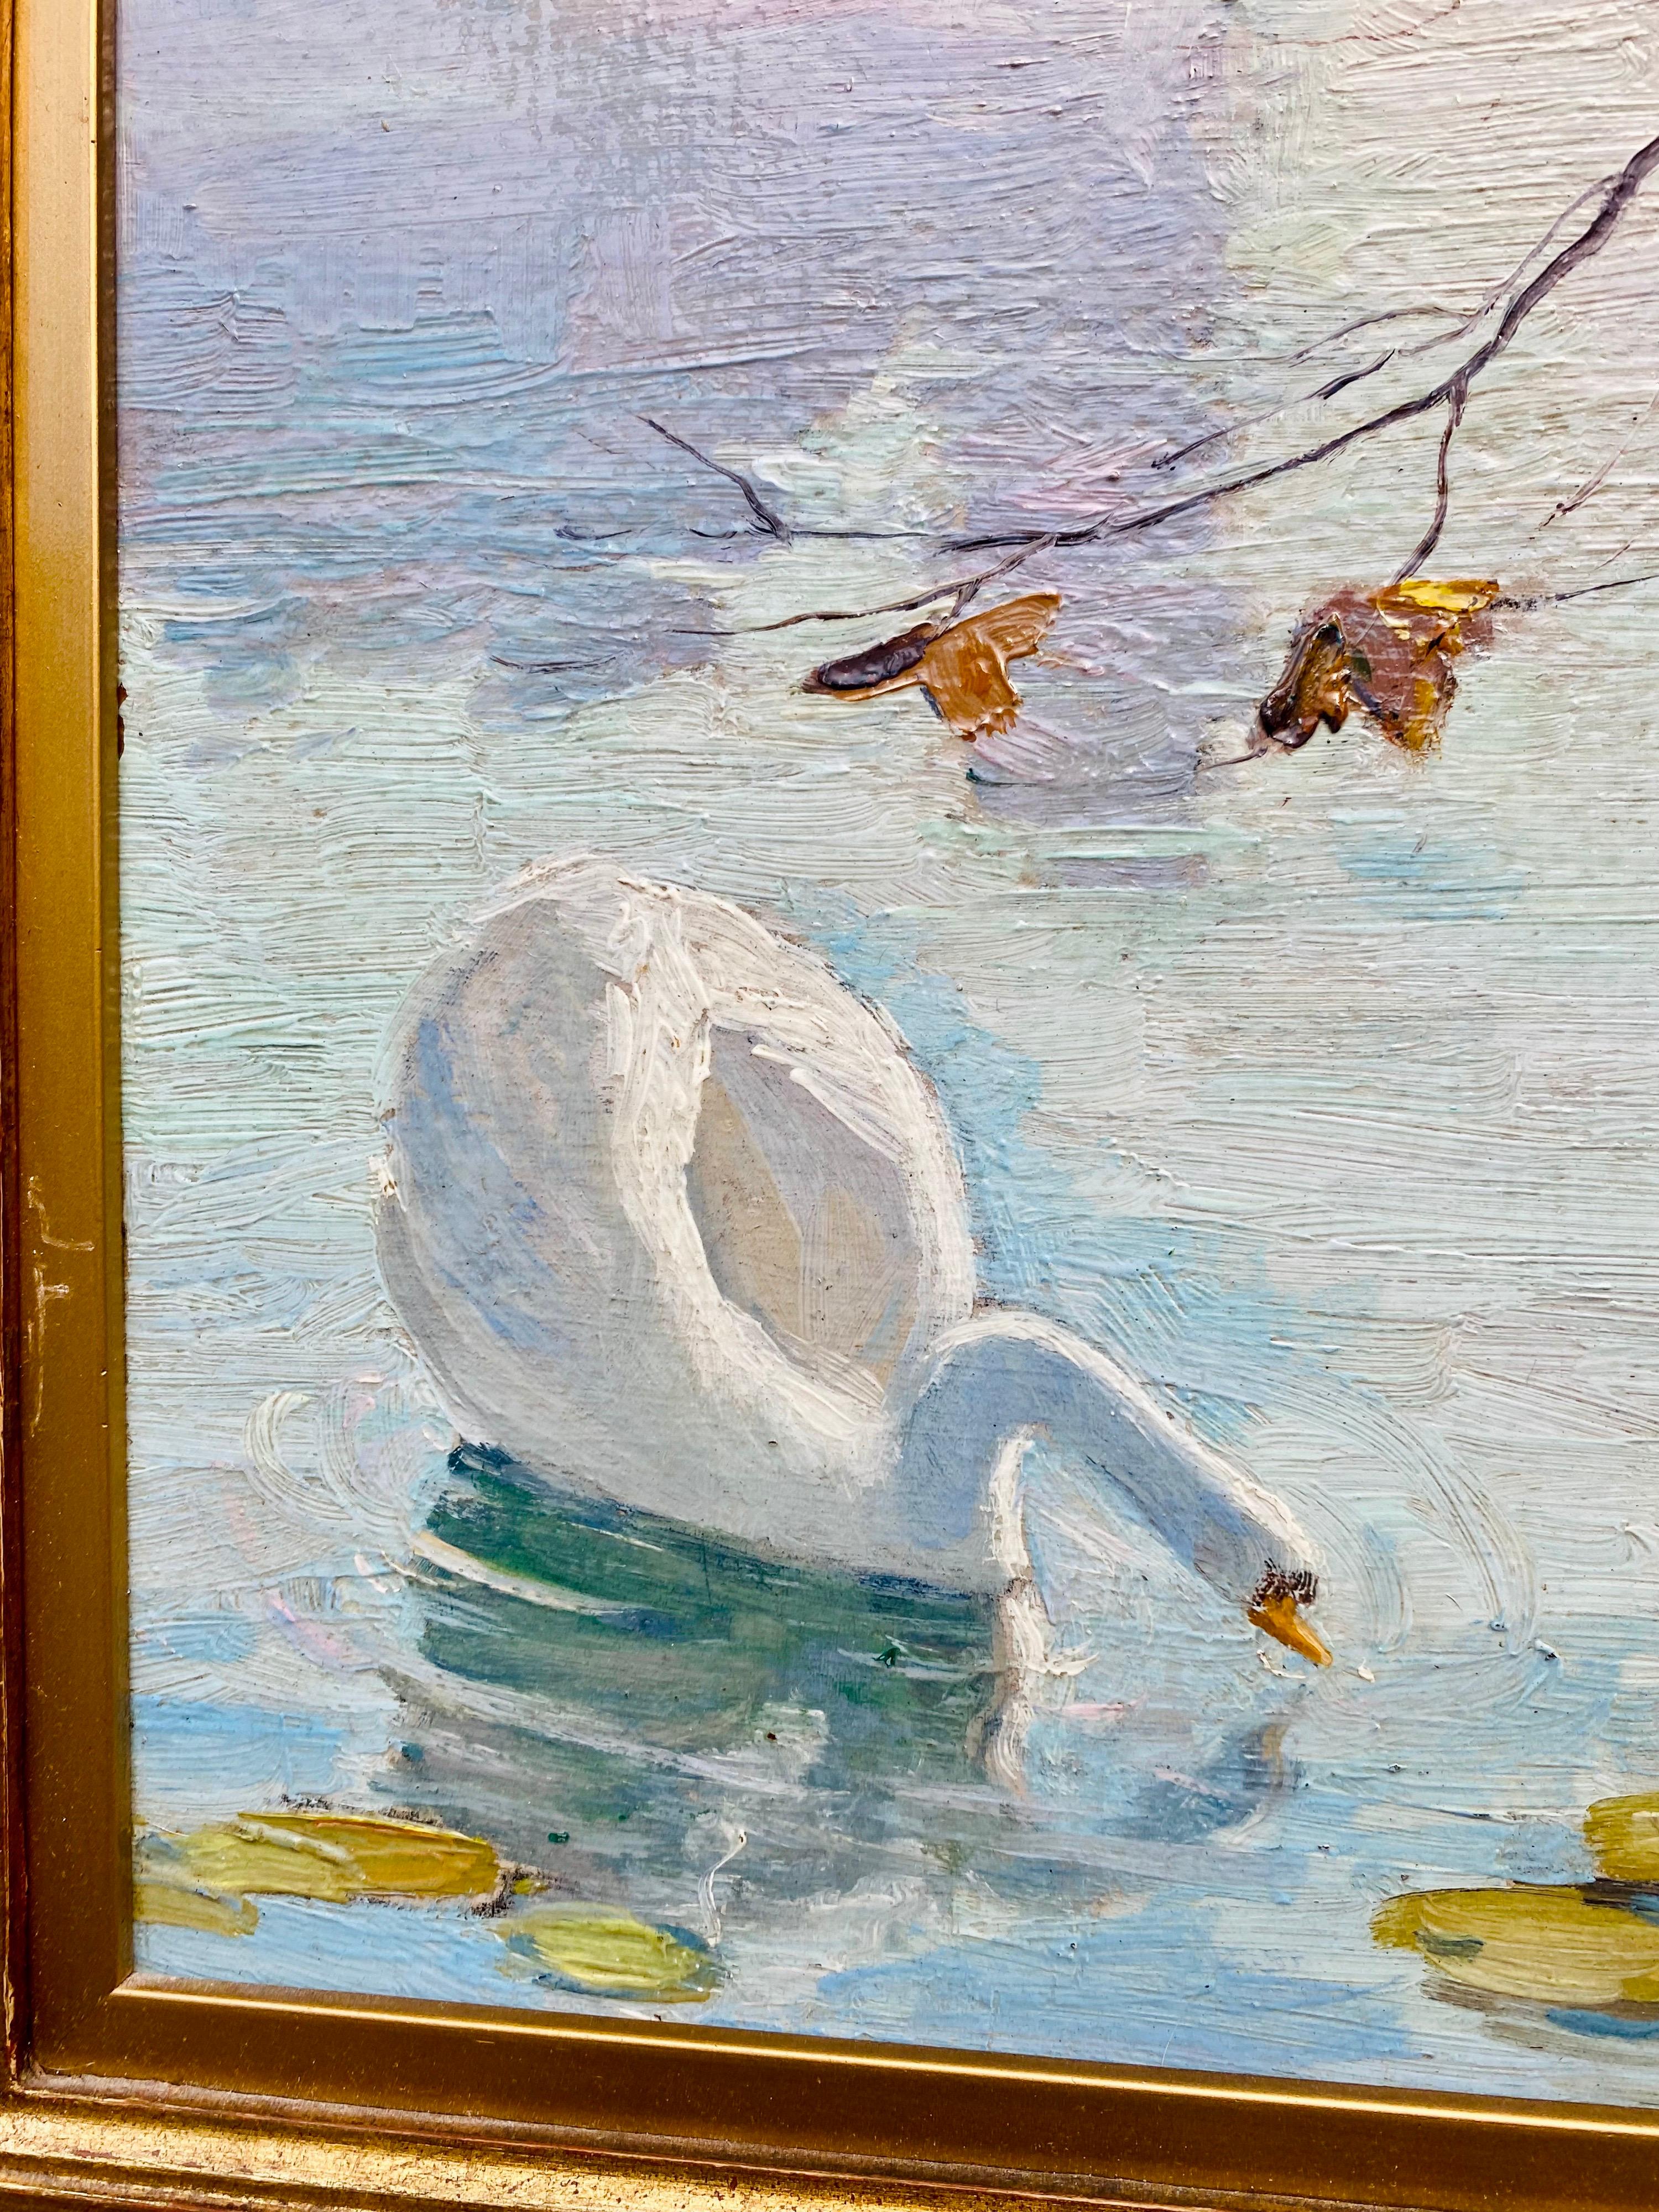 Lovely école de Paris post impressionist painting depicting an elegant swan in a lake. It appears to be a sunny day, with the glow of the sun reflecting on the water.
The painting has wonderfully vivid colors and lovely details. Housed in a